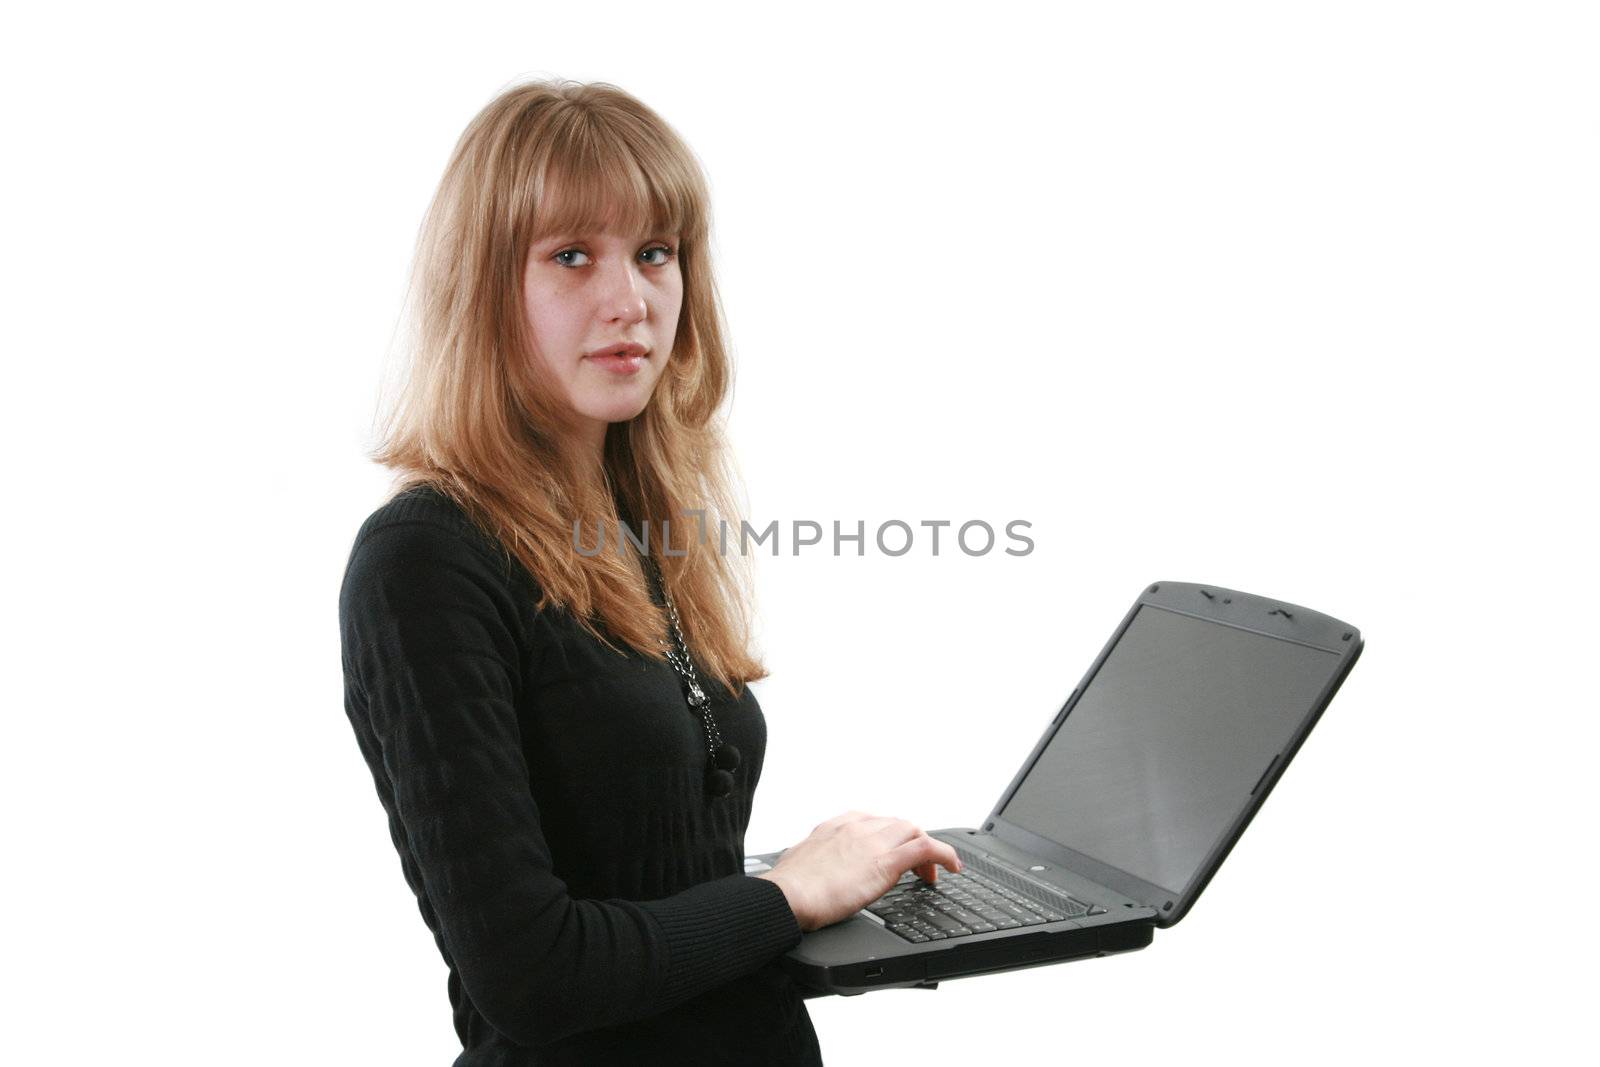 The young woman works with a computer